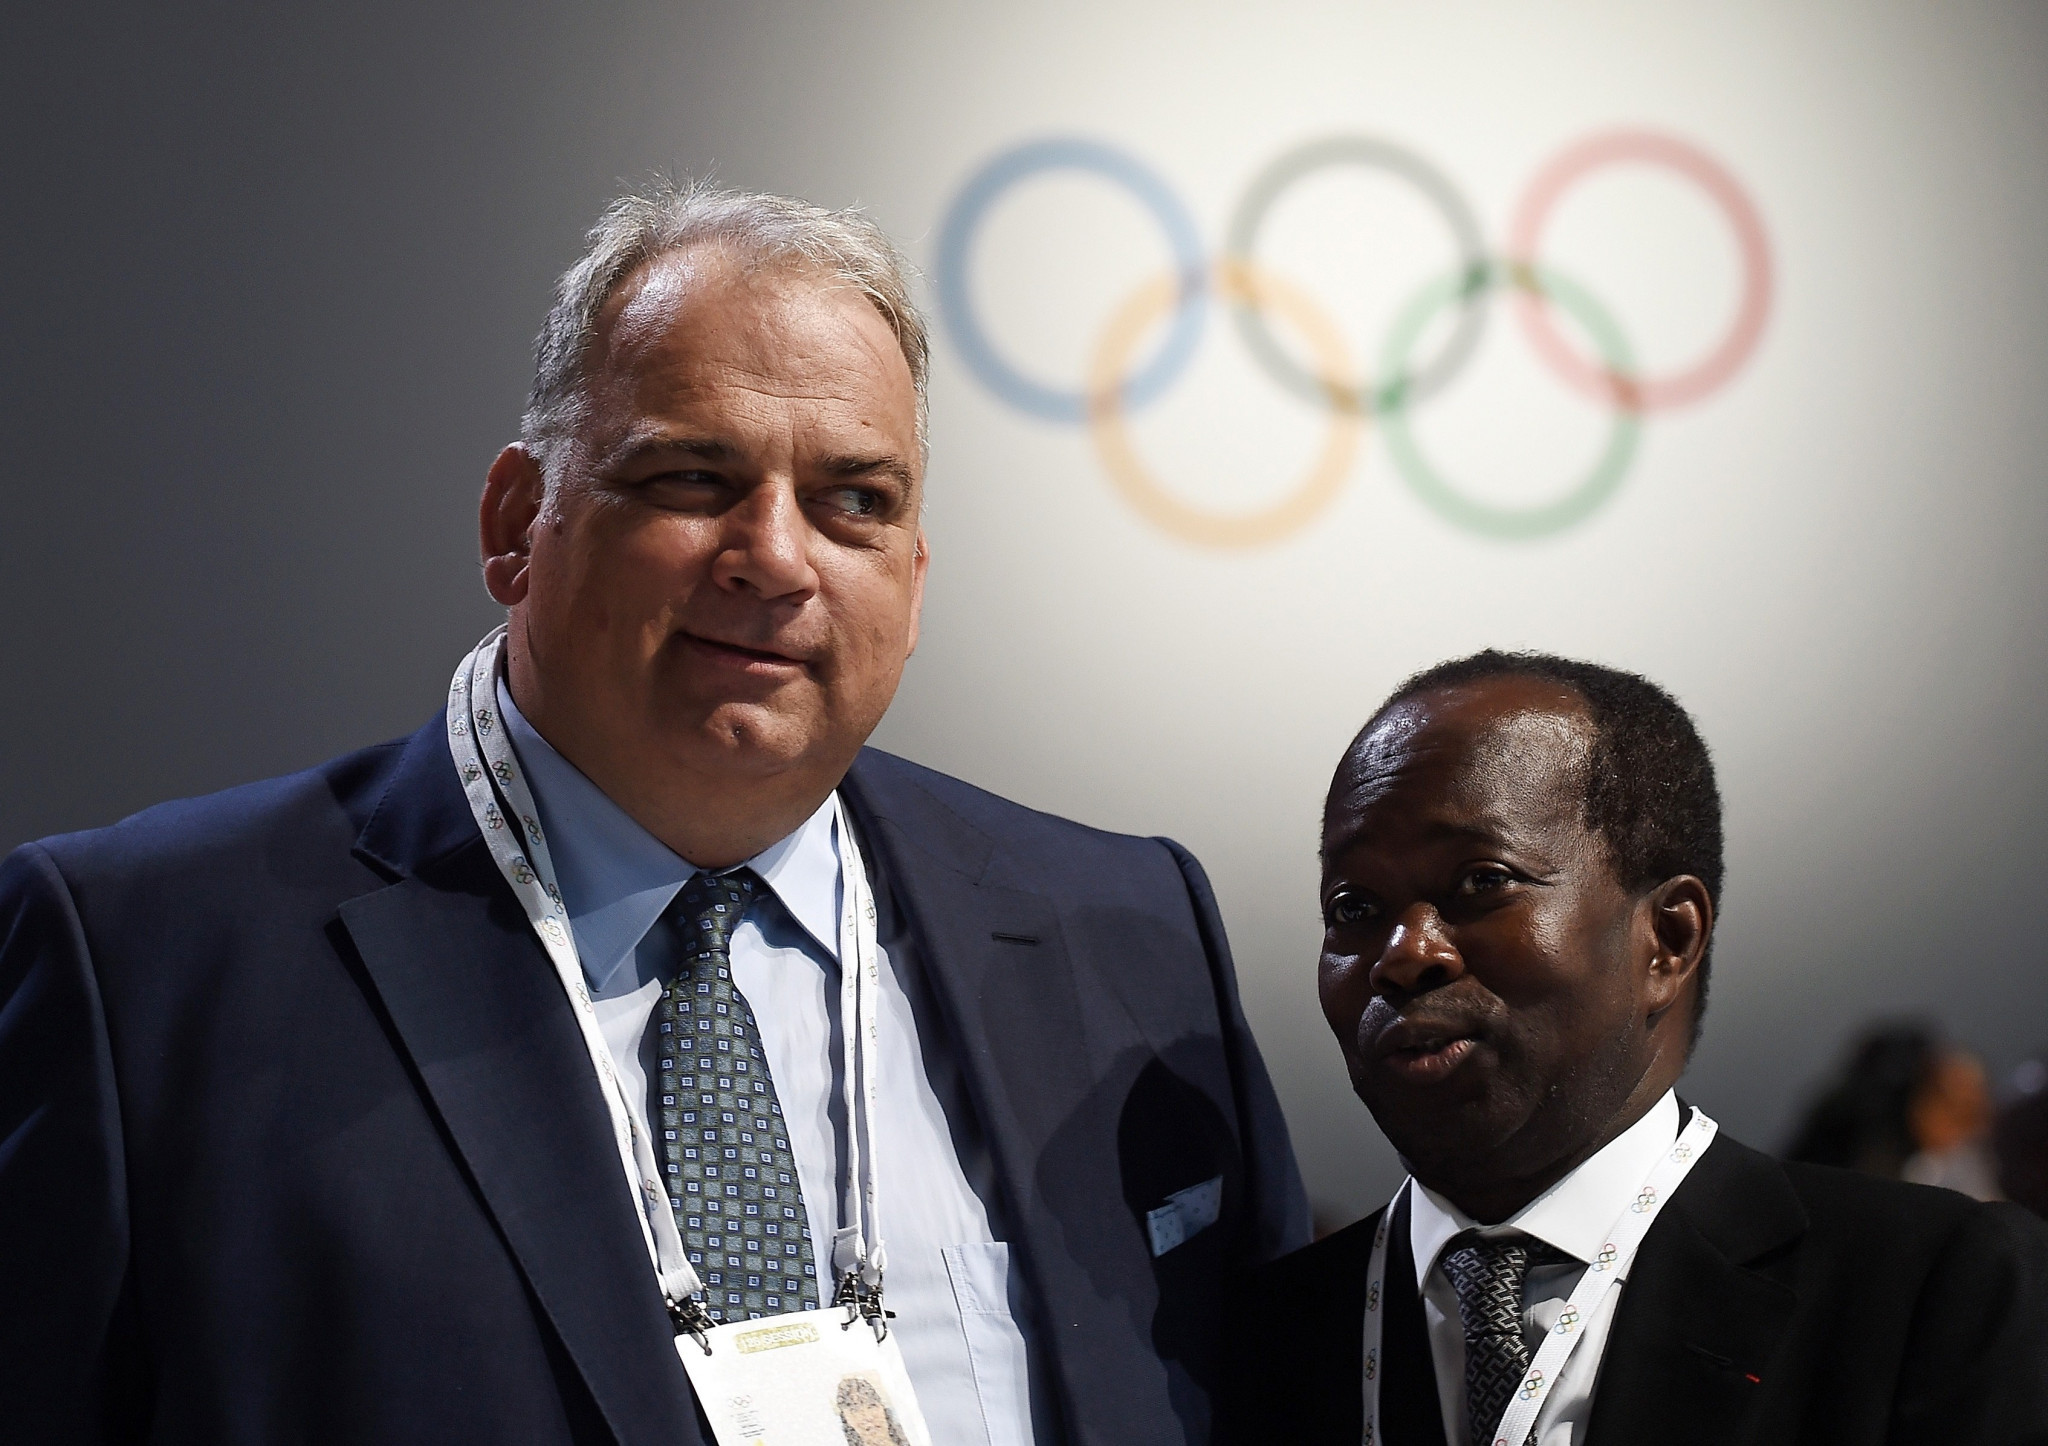 Serbia's United World Wrestling President Nenad Lalovic, left, has officially joined the IOC Executive Board as a representative of ASOIF following the resignation of C K Wu after he left AIBA ©Getty Images